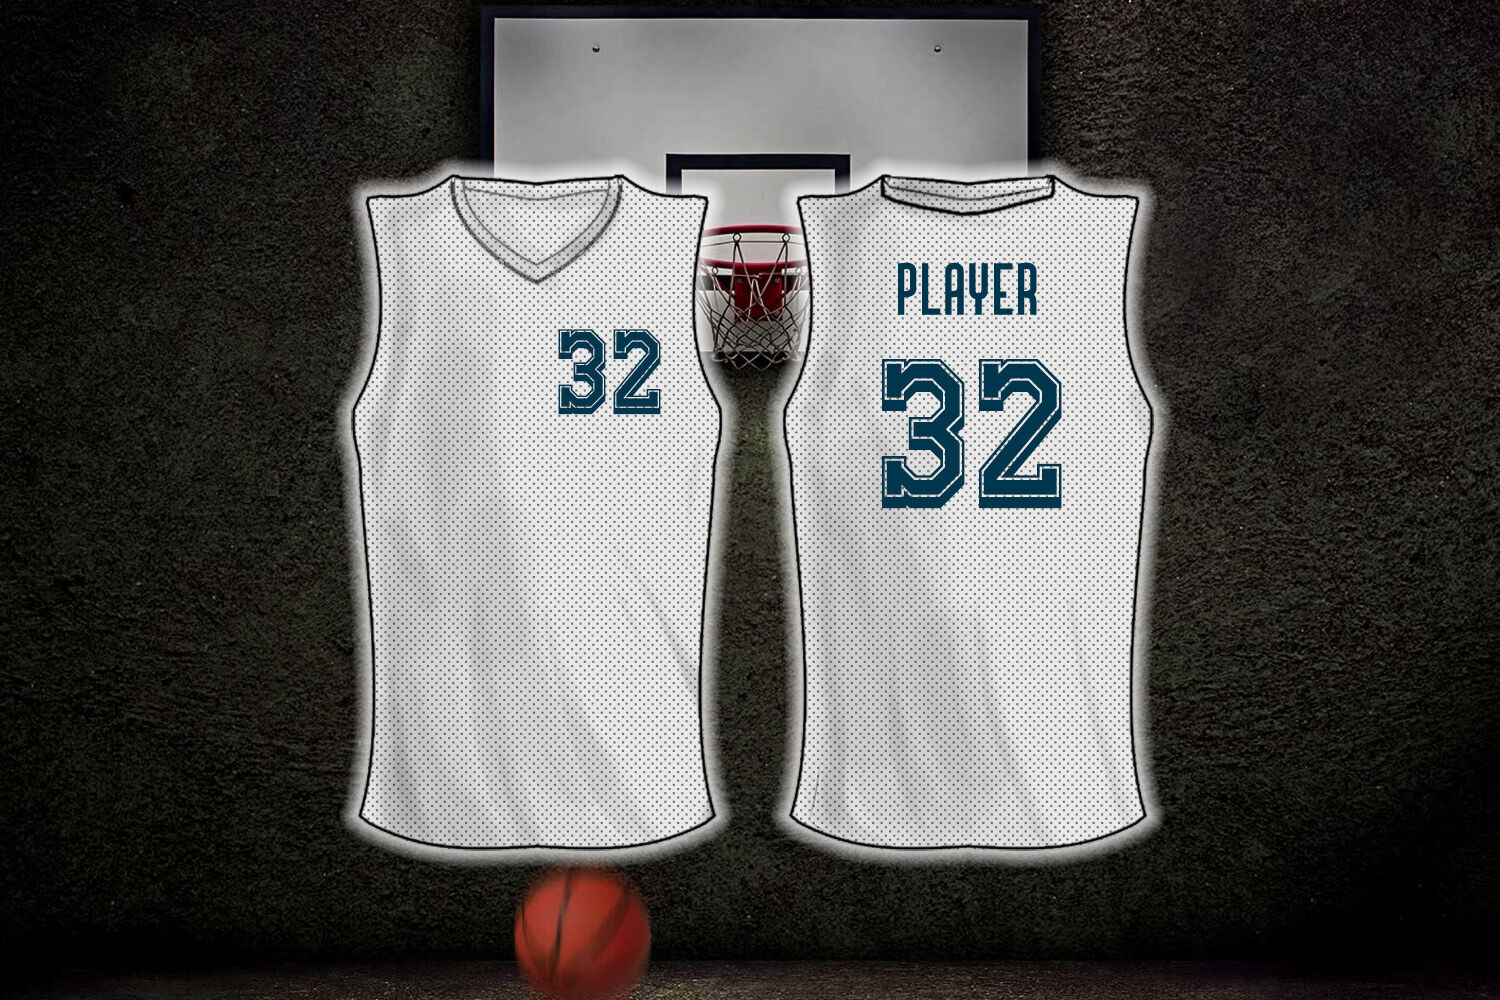 SPORTONUM - Jersey Number and Tall Display font By kYo Digital Studio |  TheHungryJPEG